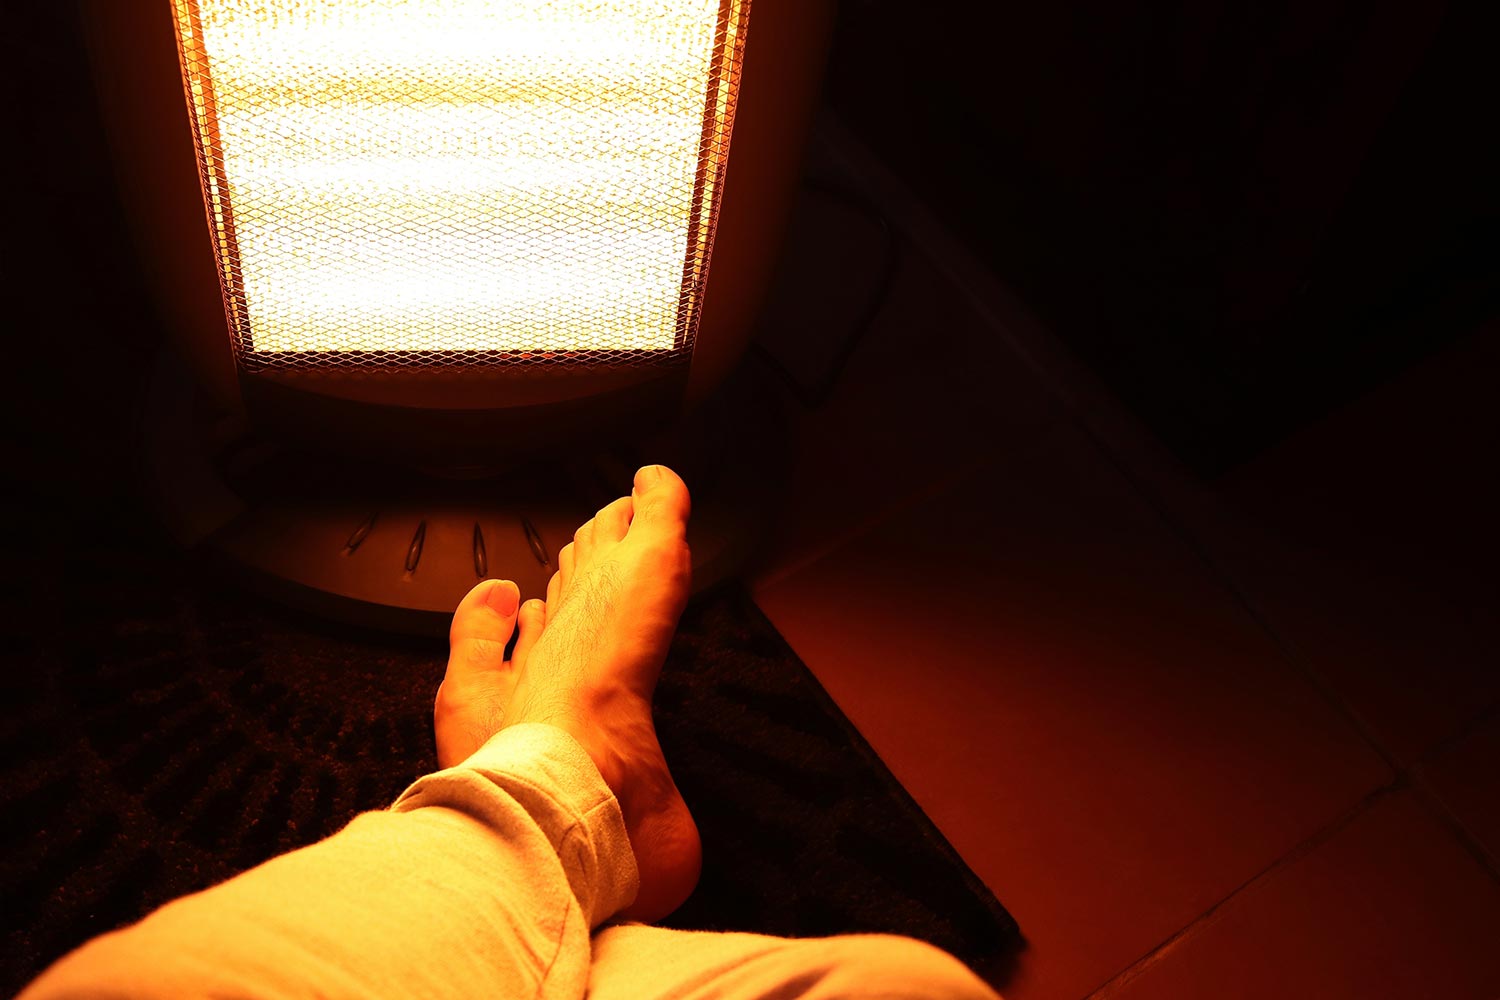 A Caucasian man's legs in front of an electric heater